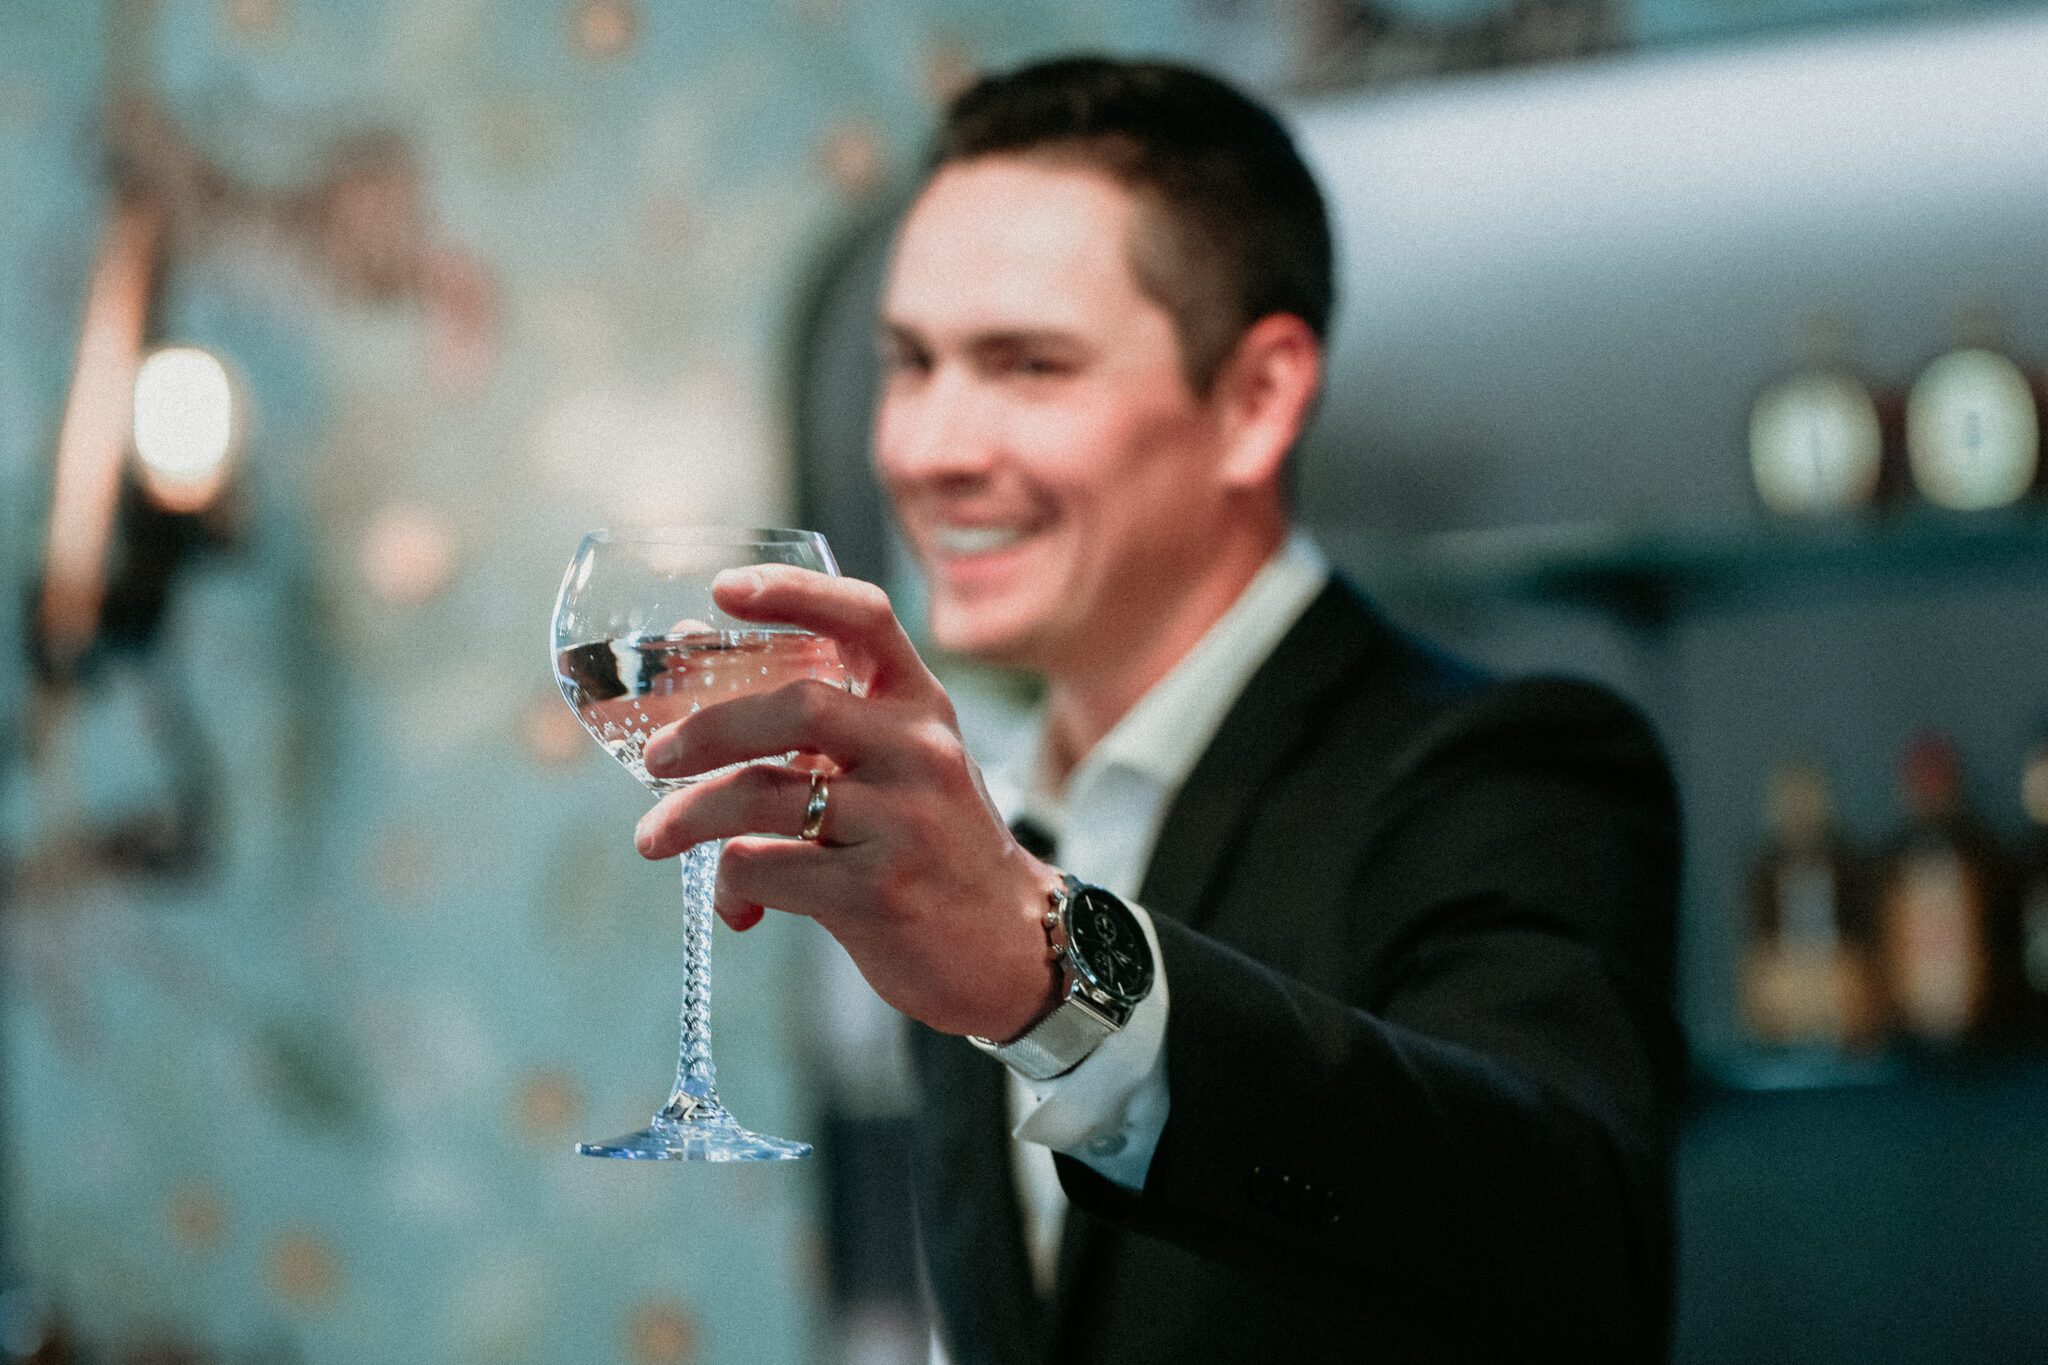 Stylish groom holding our cocktail during bold modern wedding with retro styles with eye-catching accents.